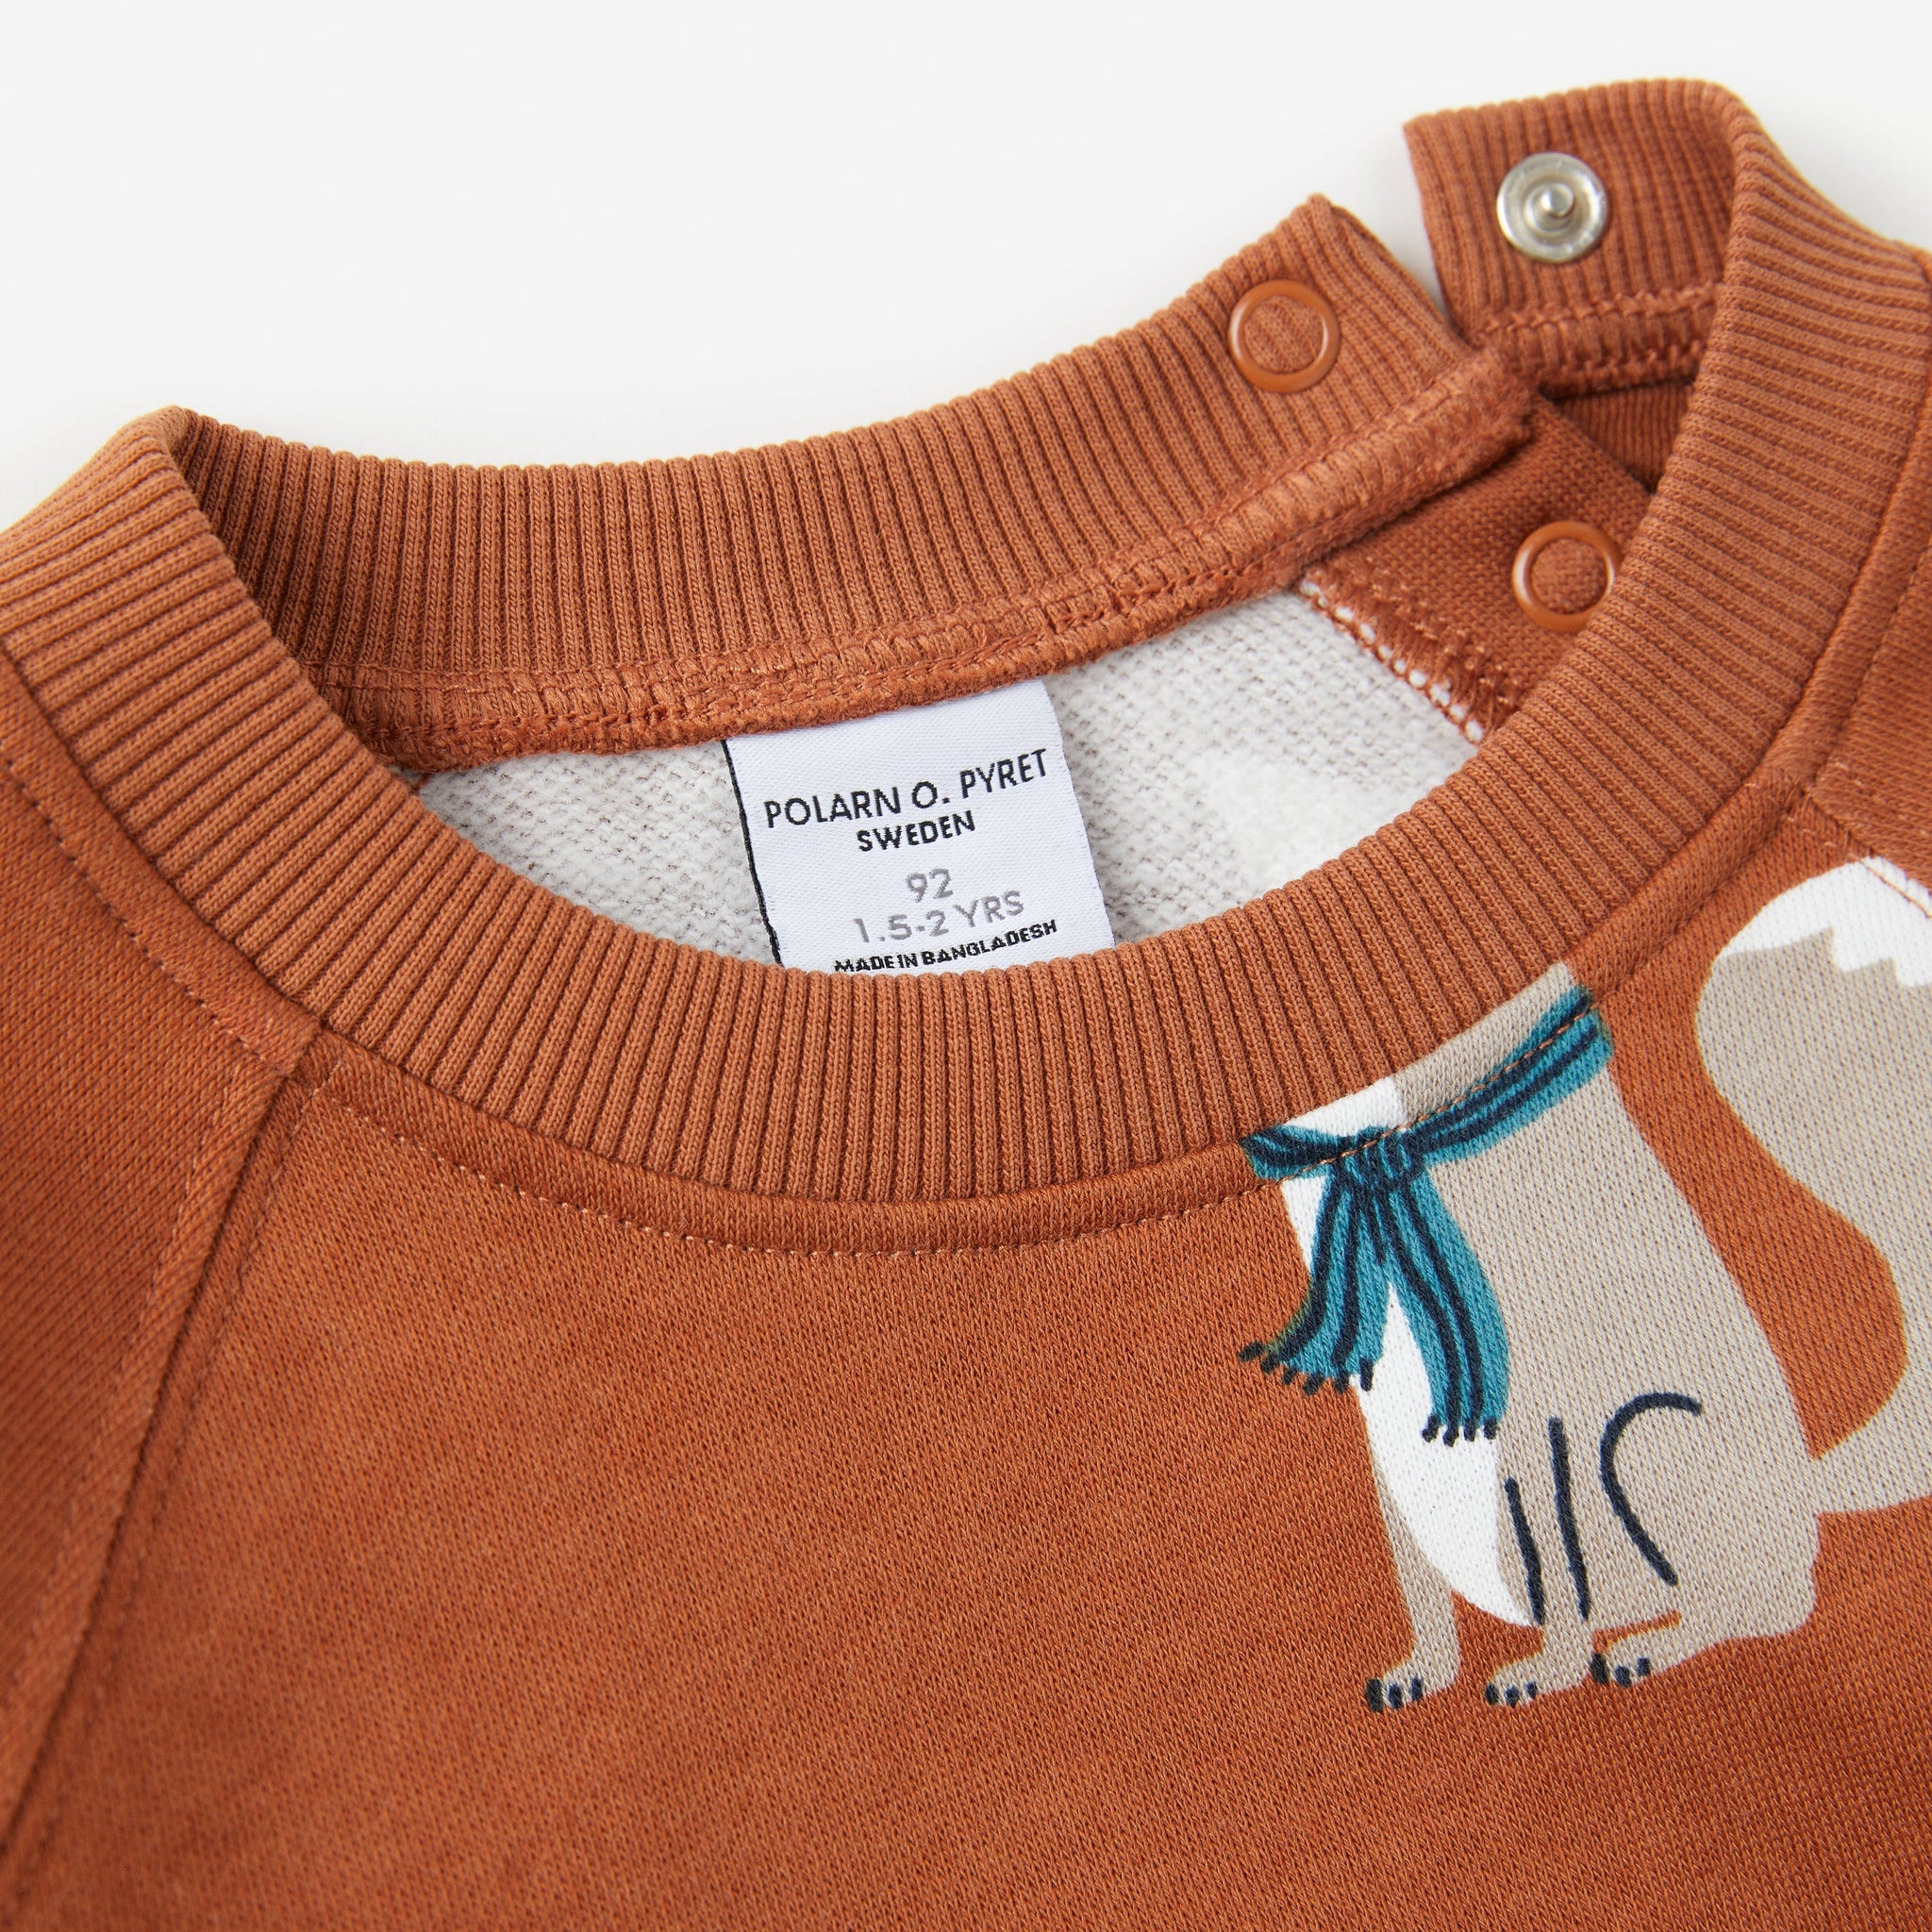 Orange Fox Print Kids Sweatshirt from the Polarn O. Pyret kidswear collection. Nordic kids clothes made from sustainable sources.